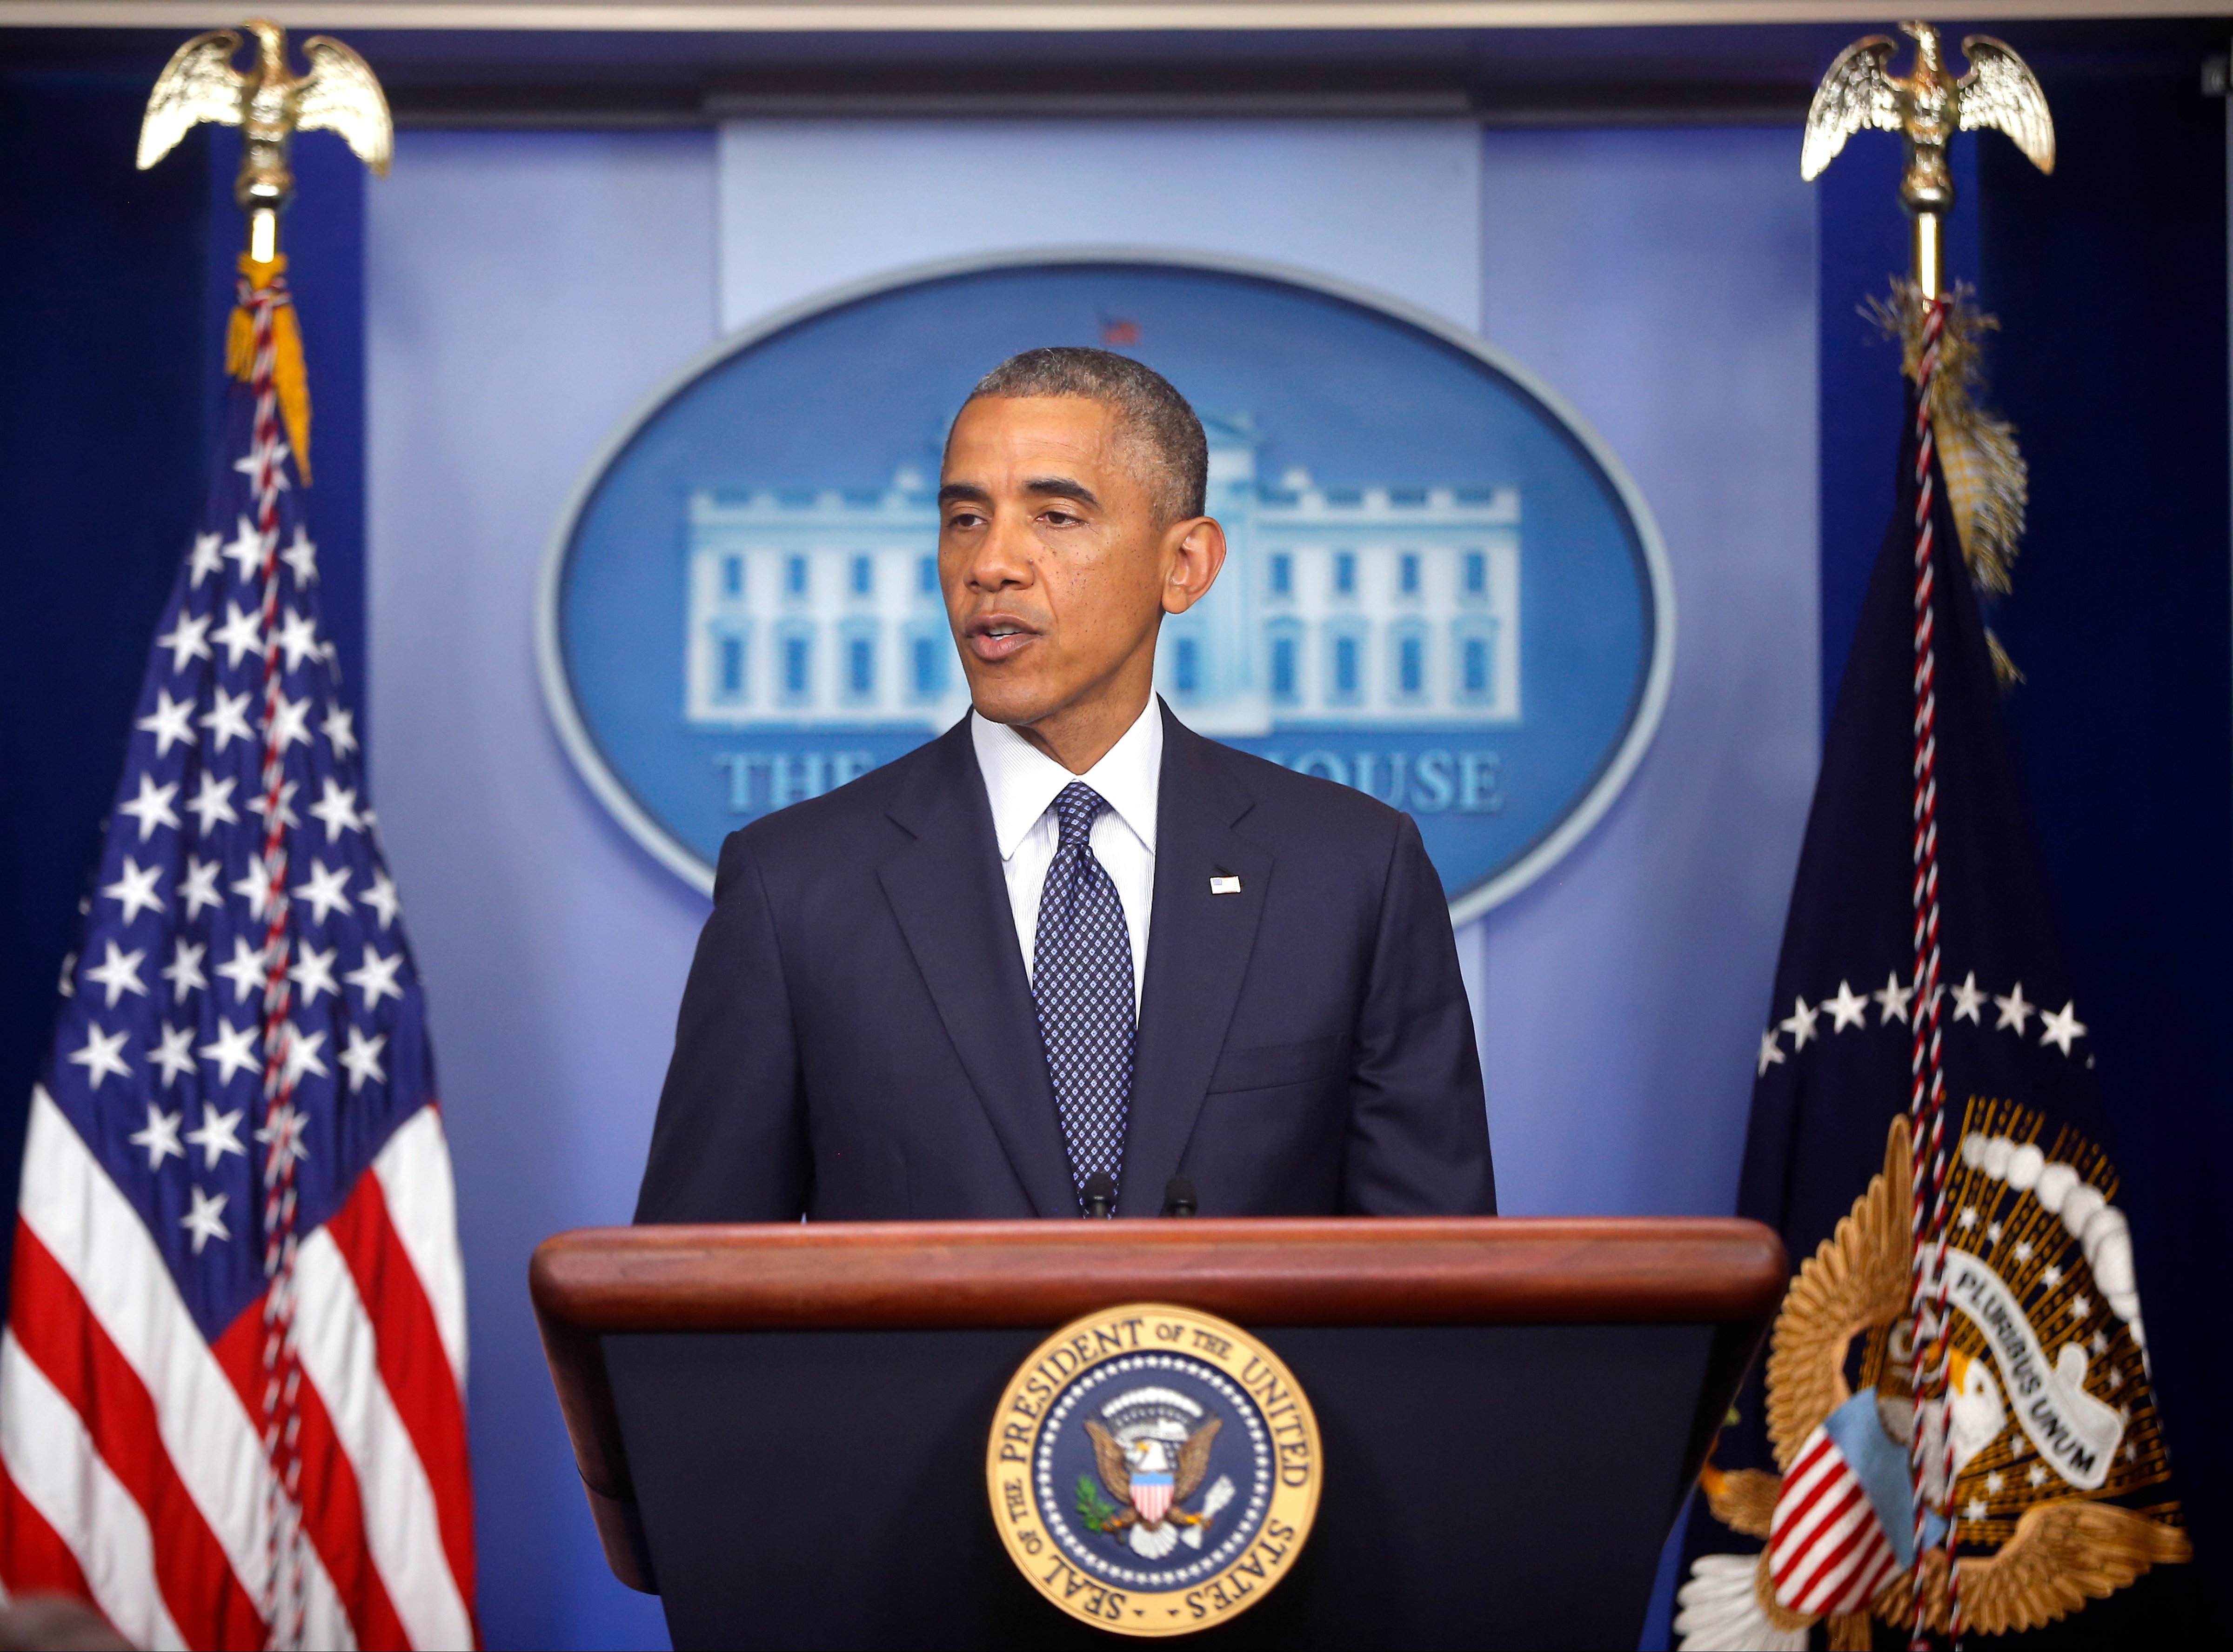 President Barack Obama speaks about foreign policy and escalating sanctions against Russia in response to the crisis in Ukraine in the James Brady Press Briefing Room at the White House in Washington DC, on July 16, 2014. 